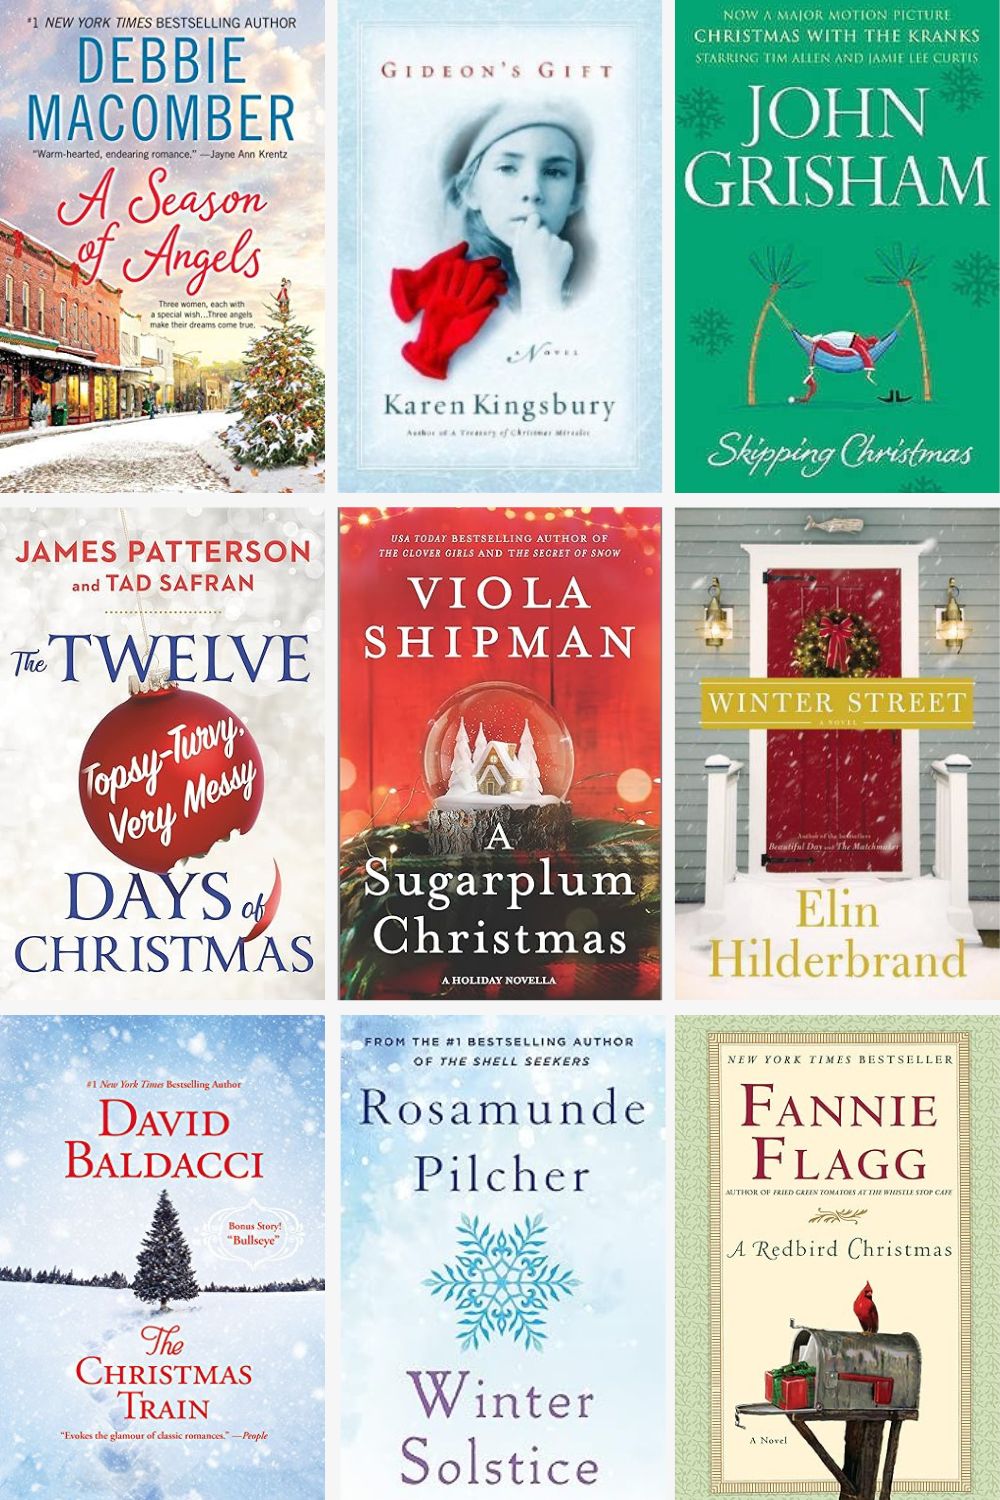 Discover 15 Festive Contemporary Christmas Novels to Read This Year